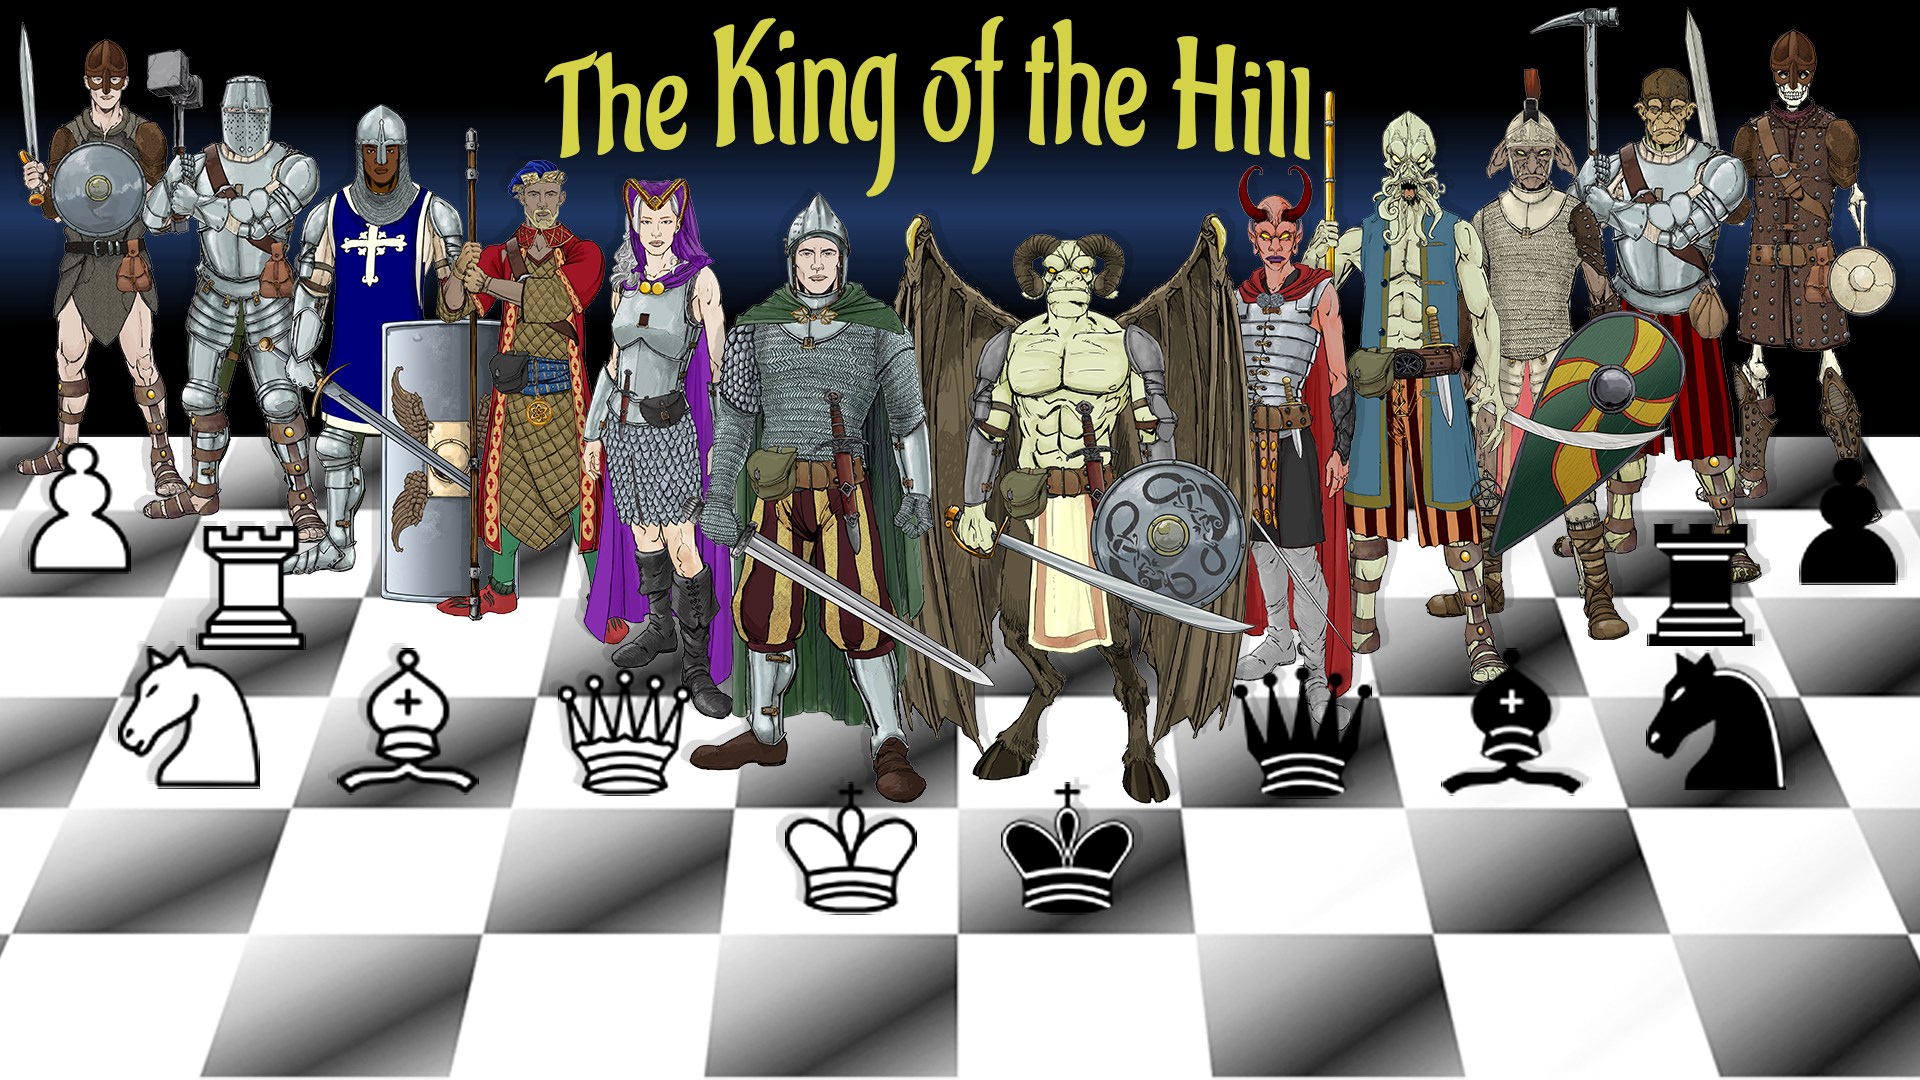 King of the hill (game) - Wikipedia